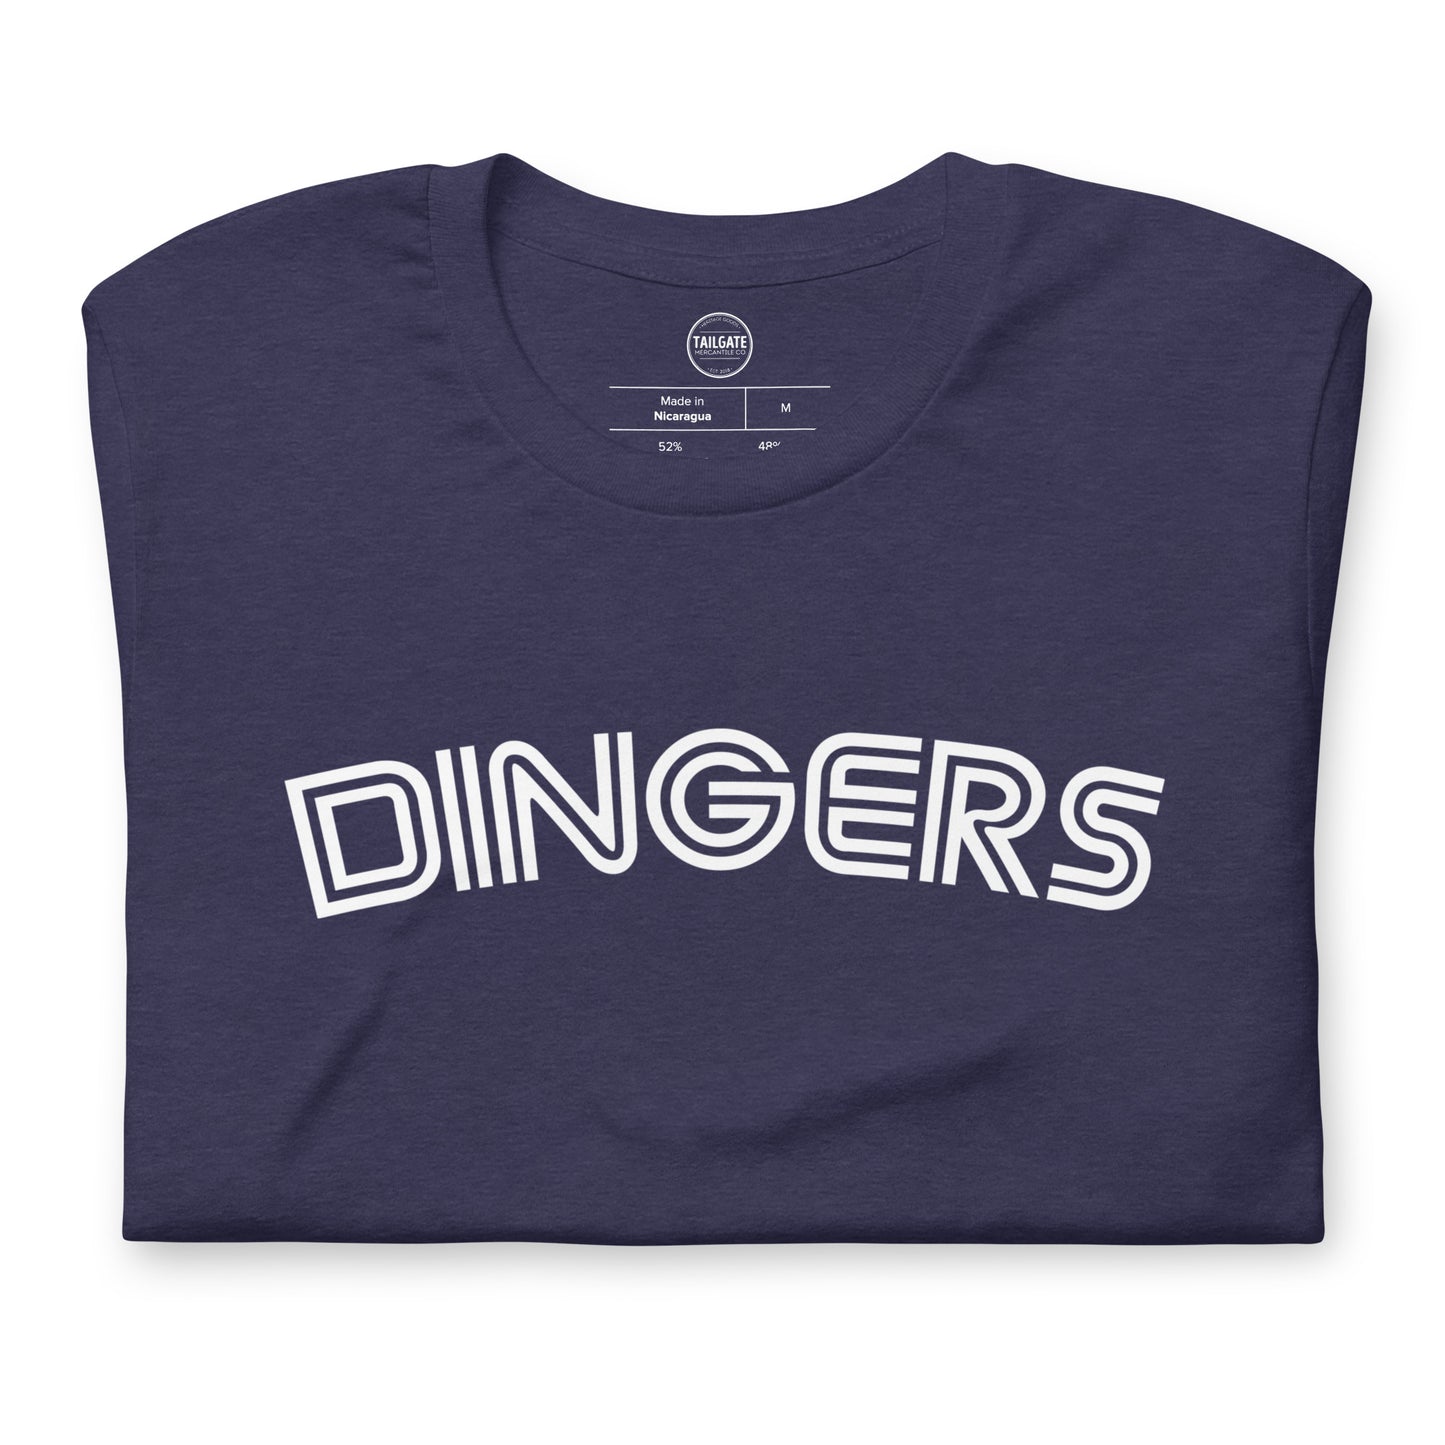 This image details the graphic design of the word "dingers" in a font similar to the Toronto Blue Jays. The font is in white and the tee is navy blue and is a close up of the design. This design is exclusive to tailgate mercantile and available only online.